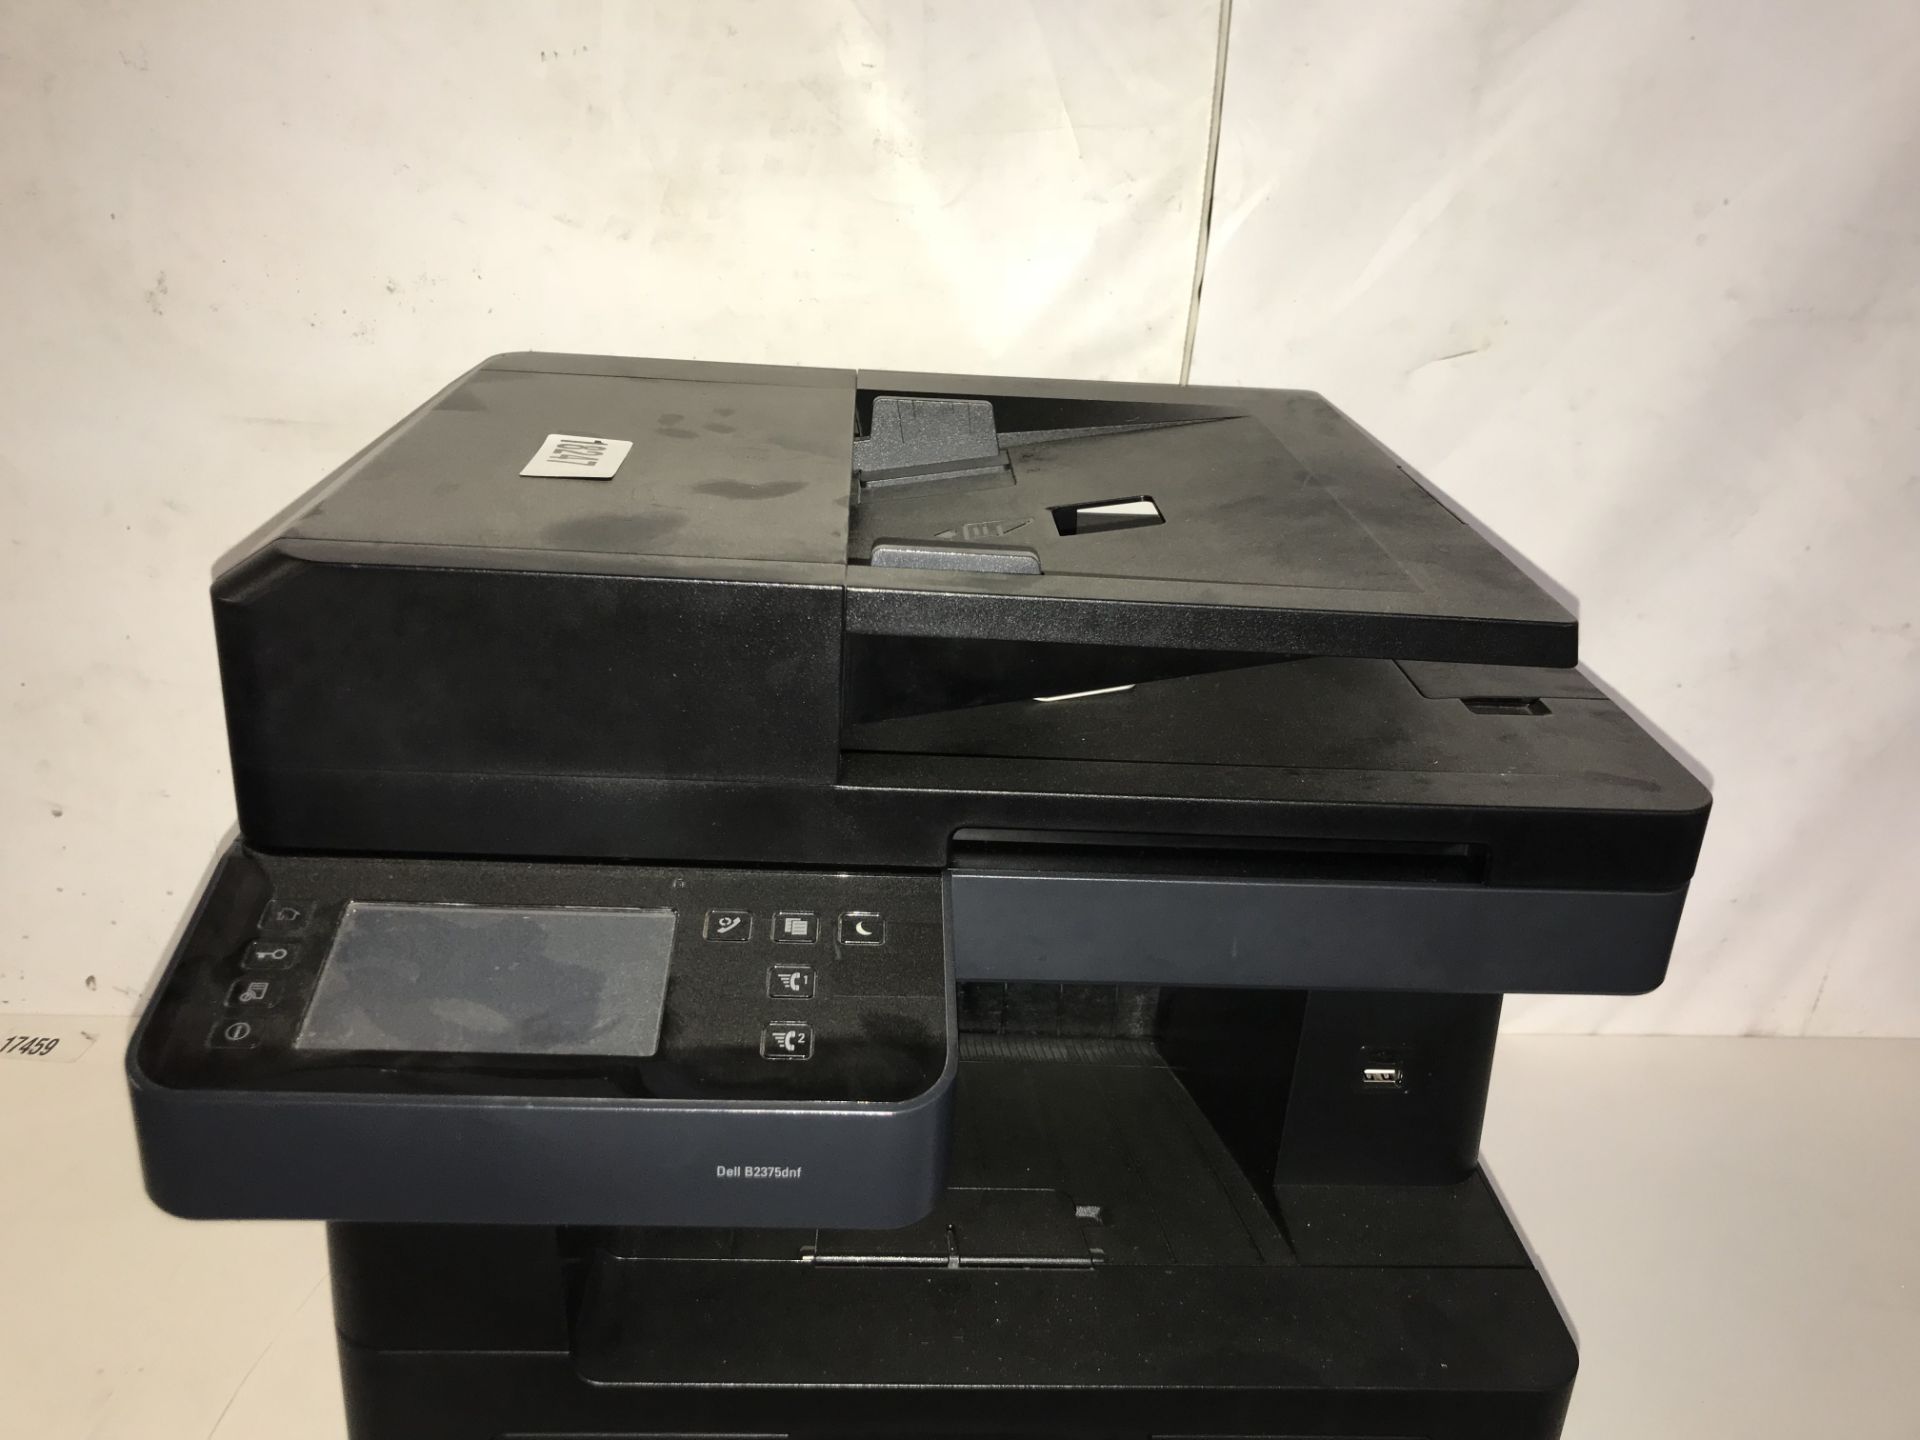 Dell B2375DNF Multifunction Printer - Image 2 of 6